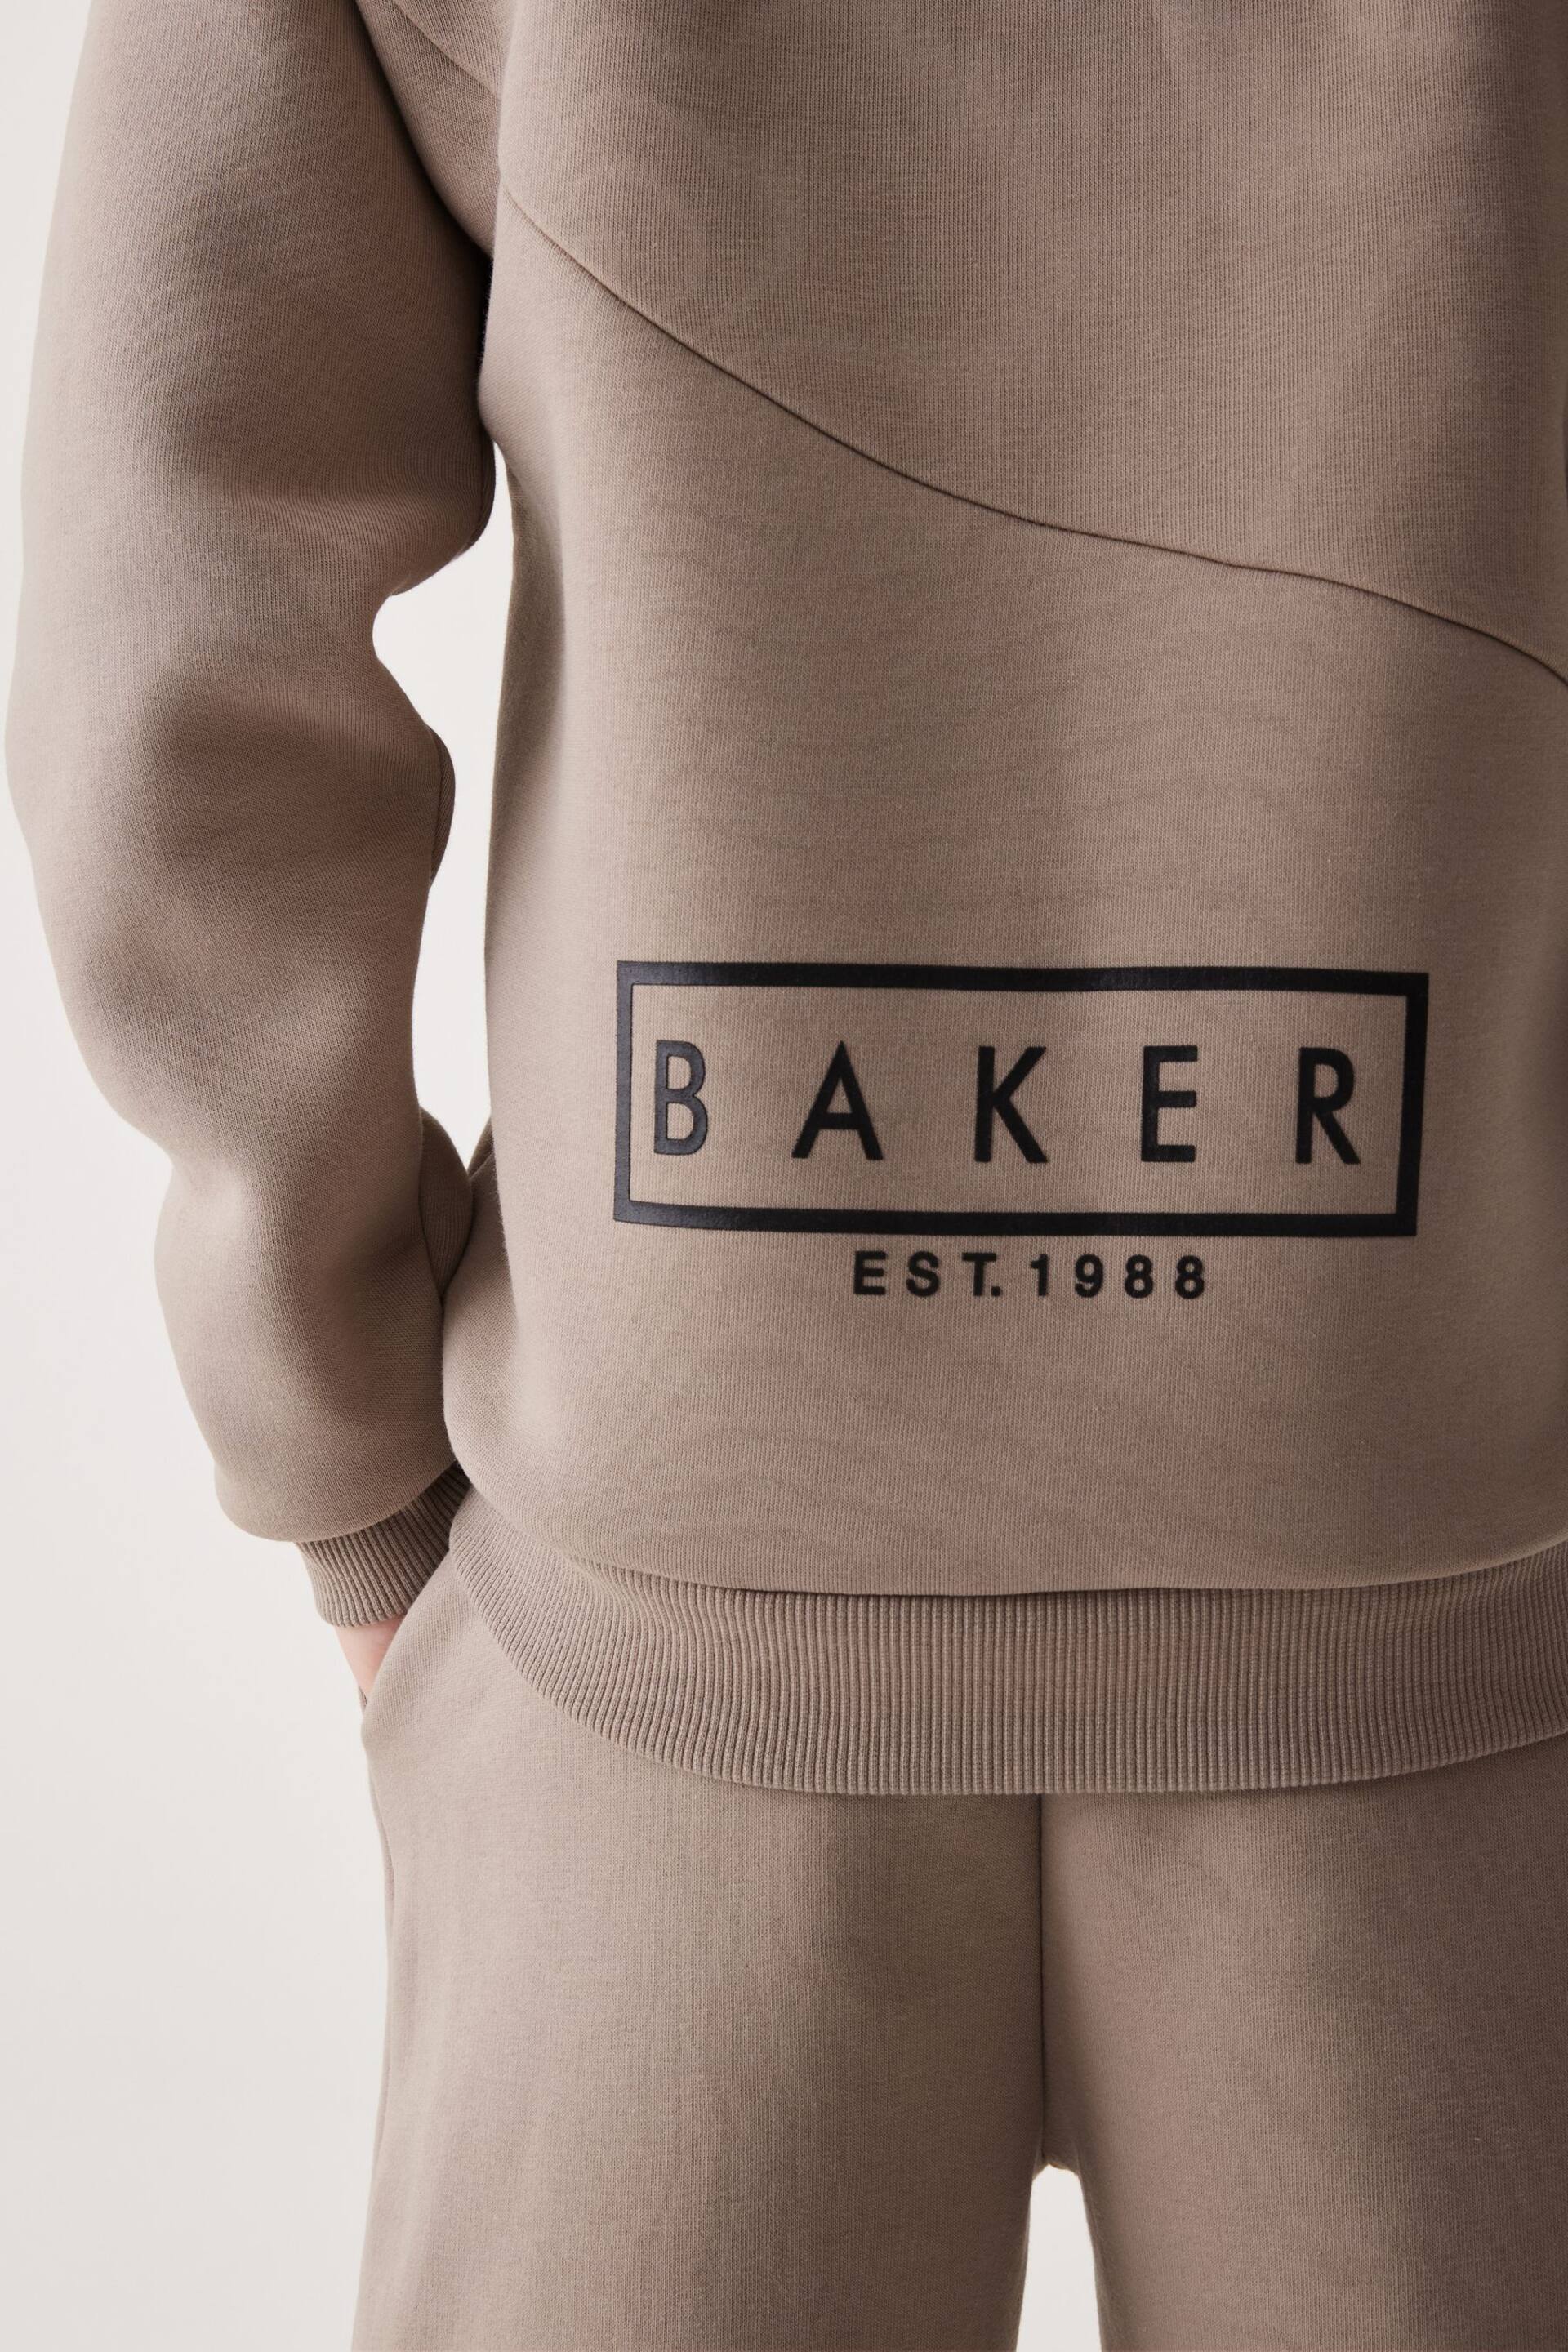 Baker by Ted Baker Seam Sweatshirt and Short Set - Image 11 of 16